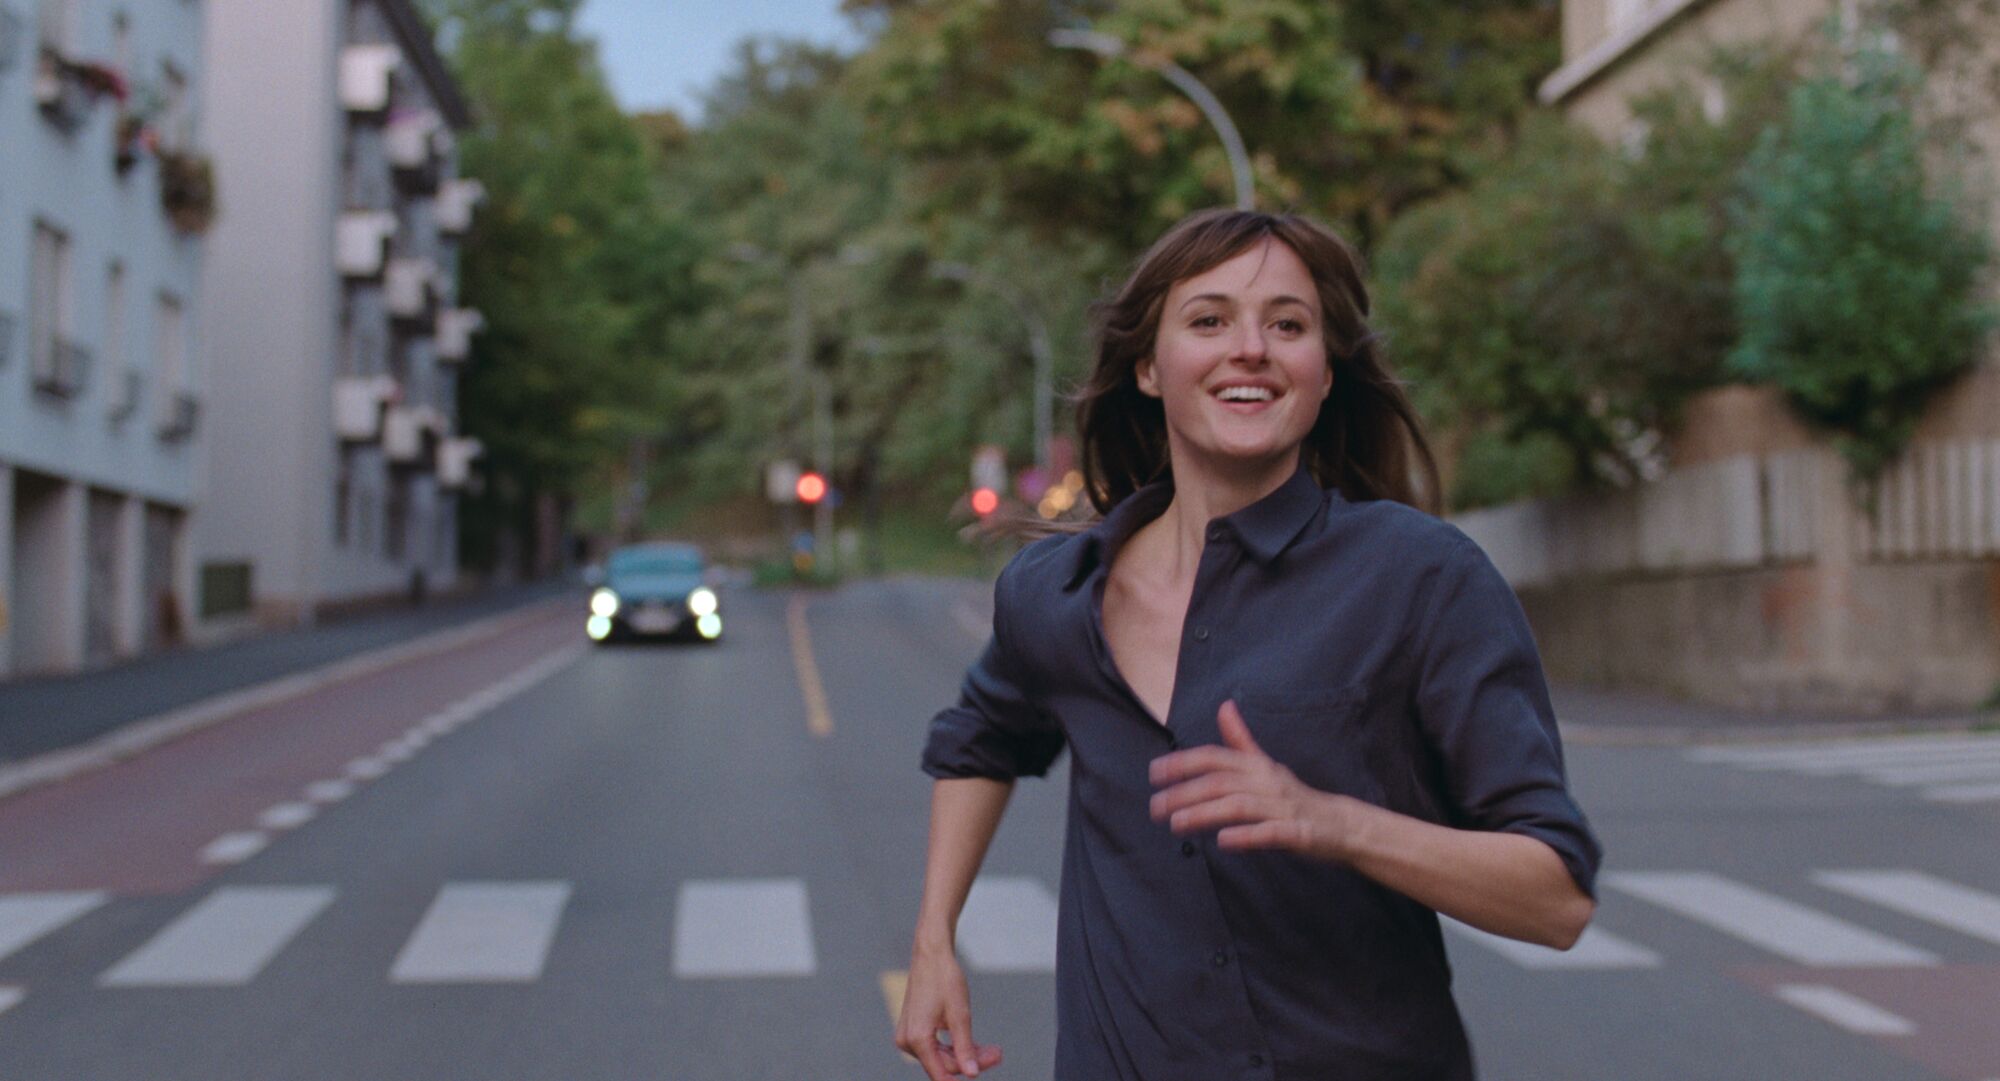 A smiling woman runs down the middle of a street.